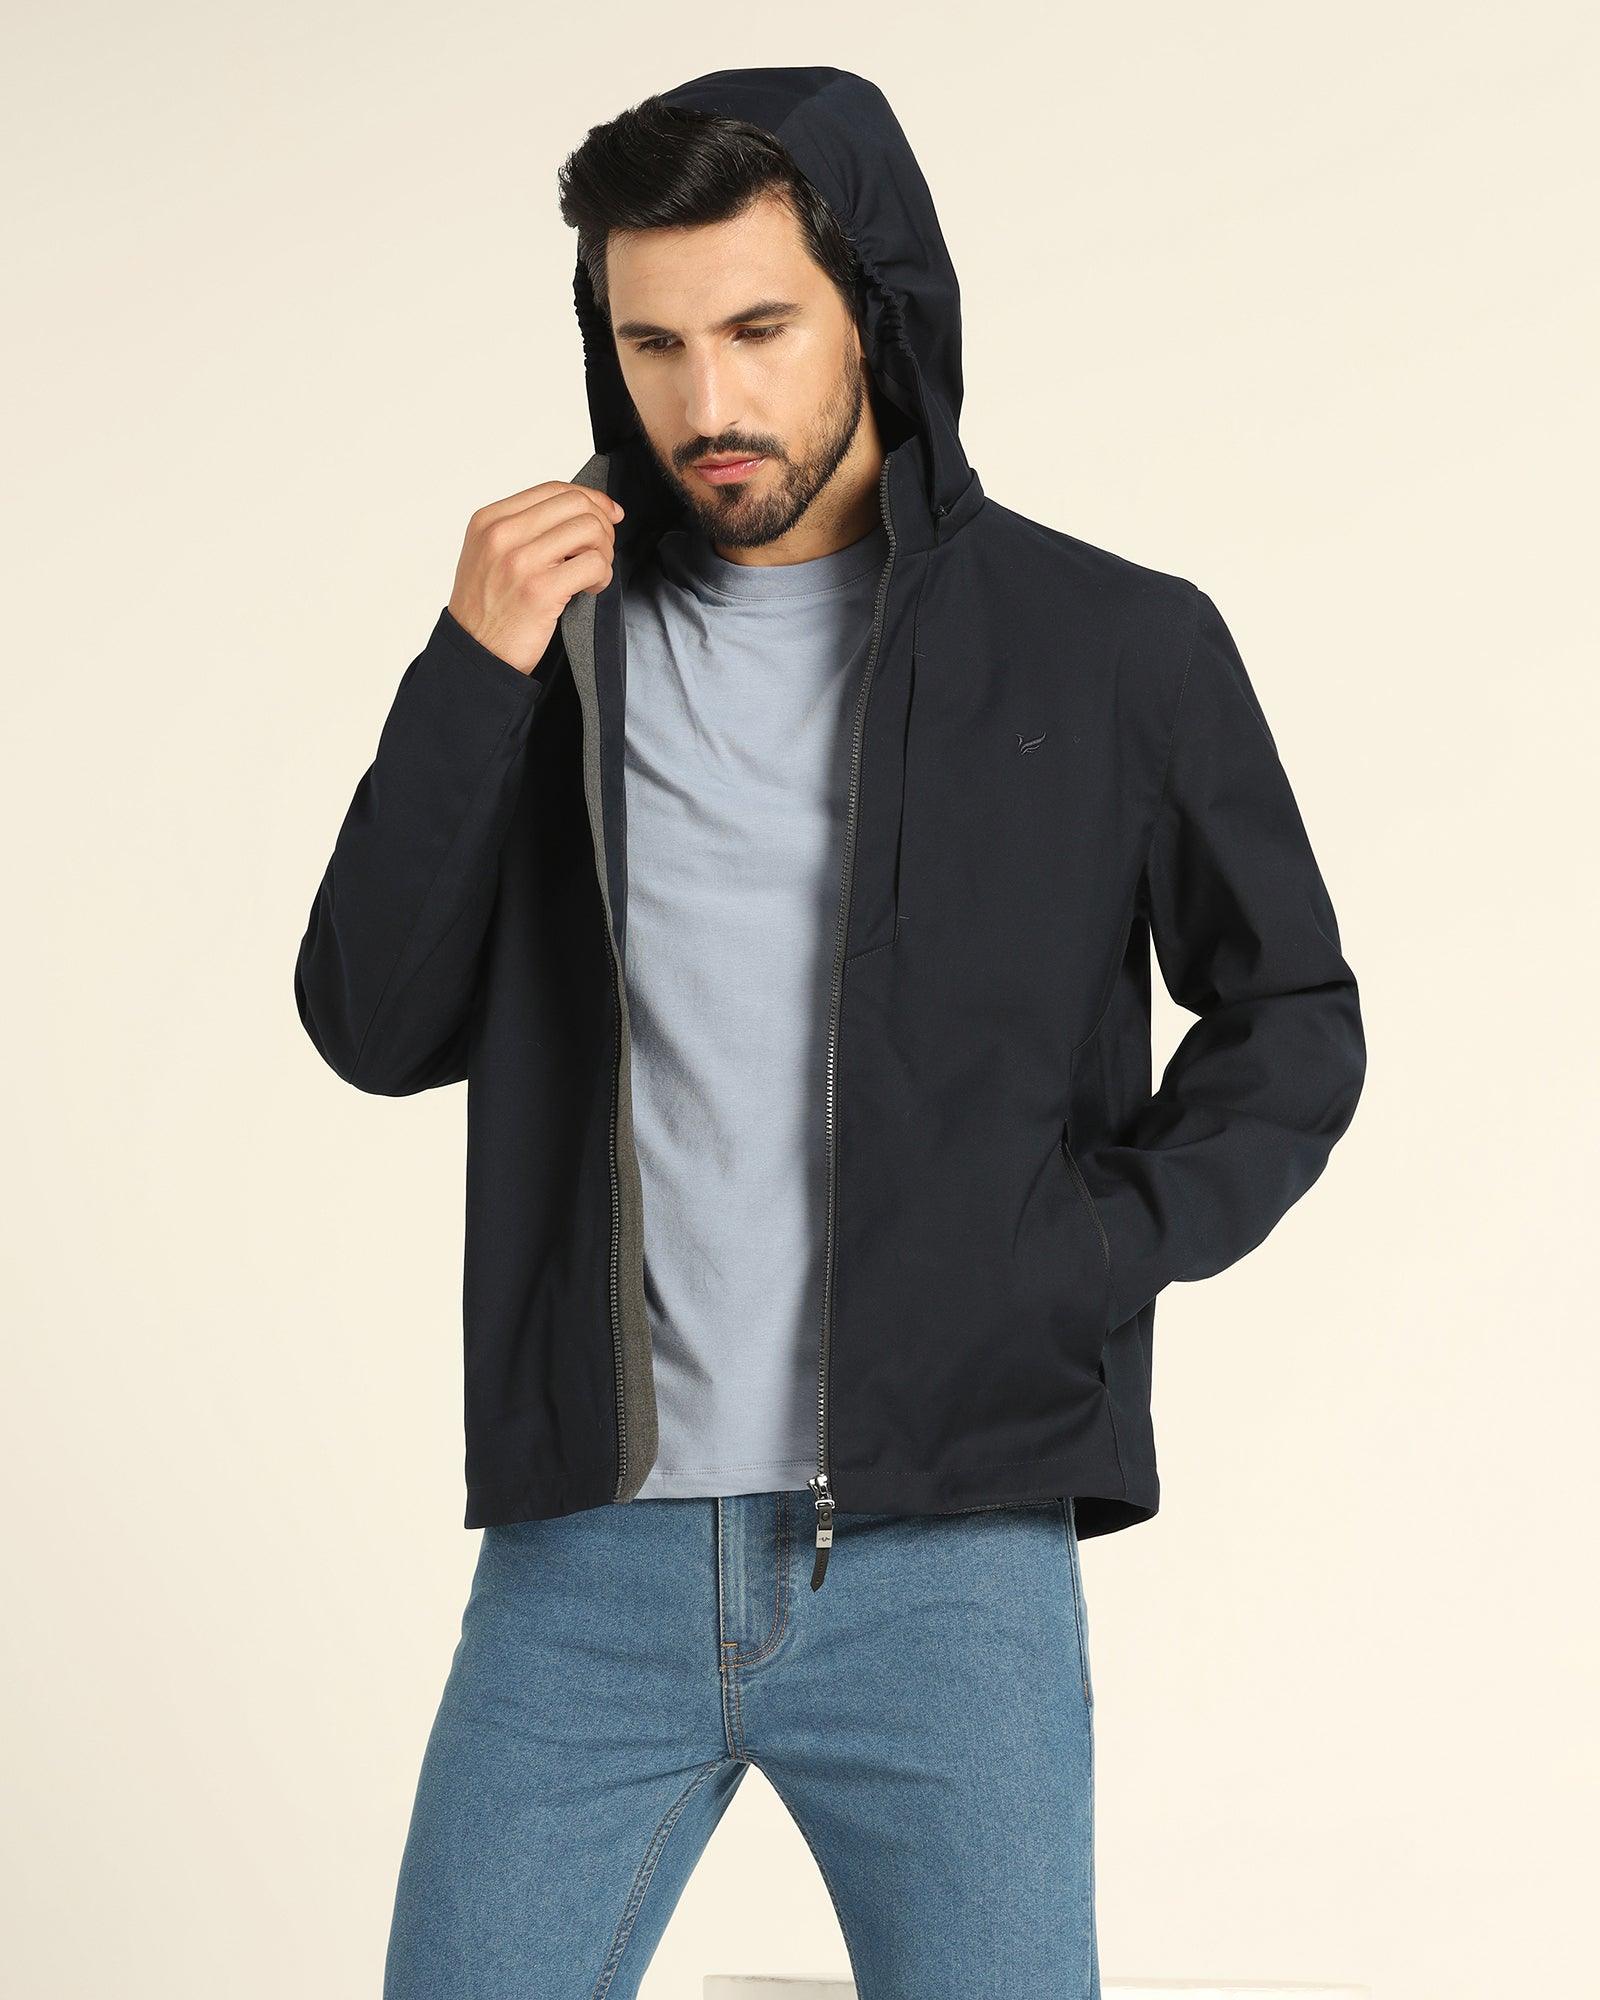 Buy Hoodies for Men Full Zip Up Fleece Warm Jackets Thick Coats Heavyweight  Sweatershirts, A-black, X-Large at Amazon.in